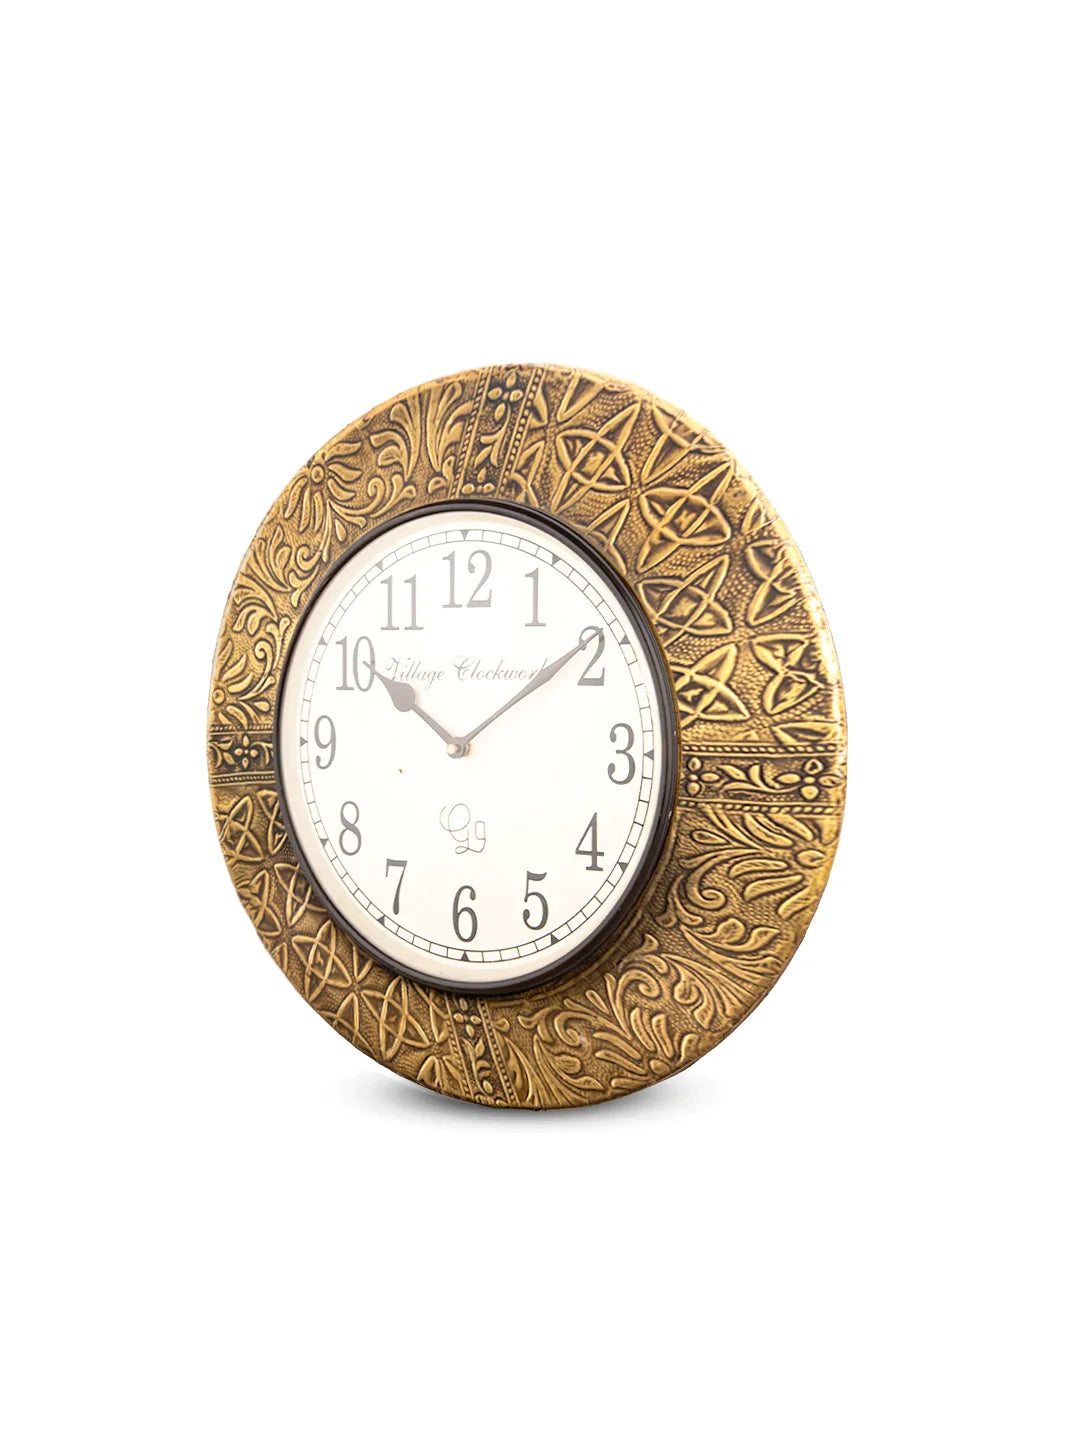 Metal Round Golden Design Embossed 12 Inches Analog Wall Clock